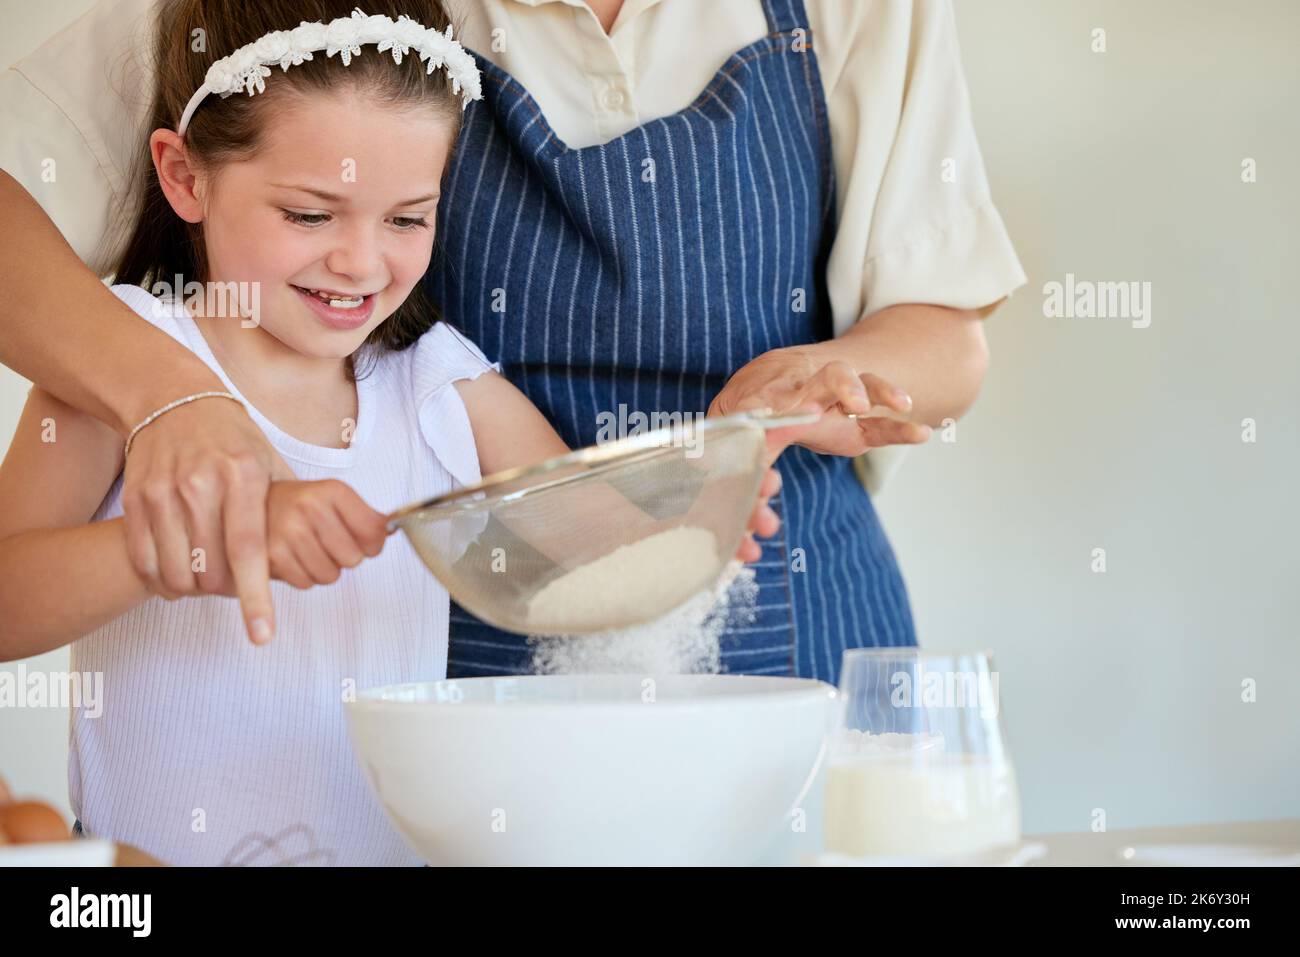 She knows the best techniques. a little girl helping her parent cook in the kitchen at home. Stock Photo